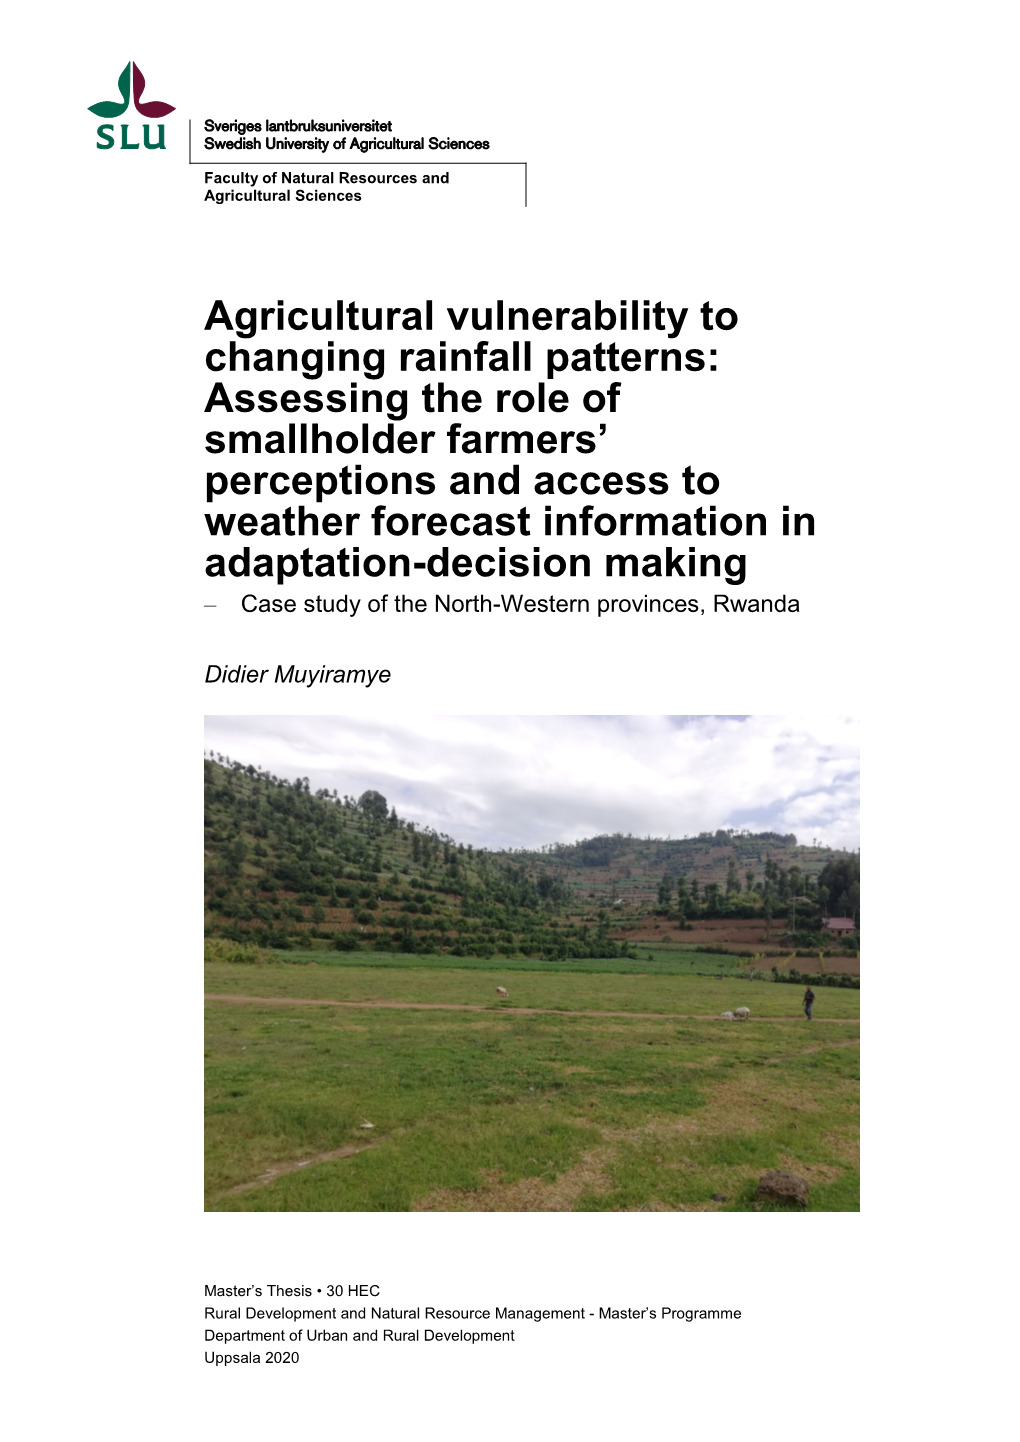 Agricultural Vulnerability to Changing Rainfall Patterns: Assessing the Role of Smallholder Farmers' Perceptions and Access To